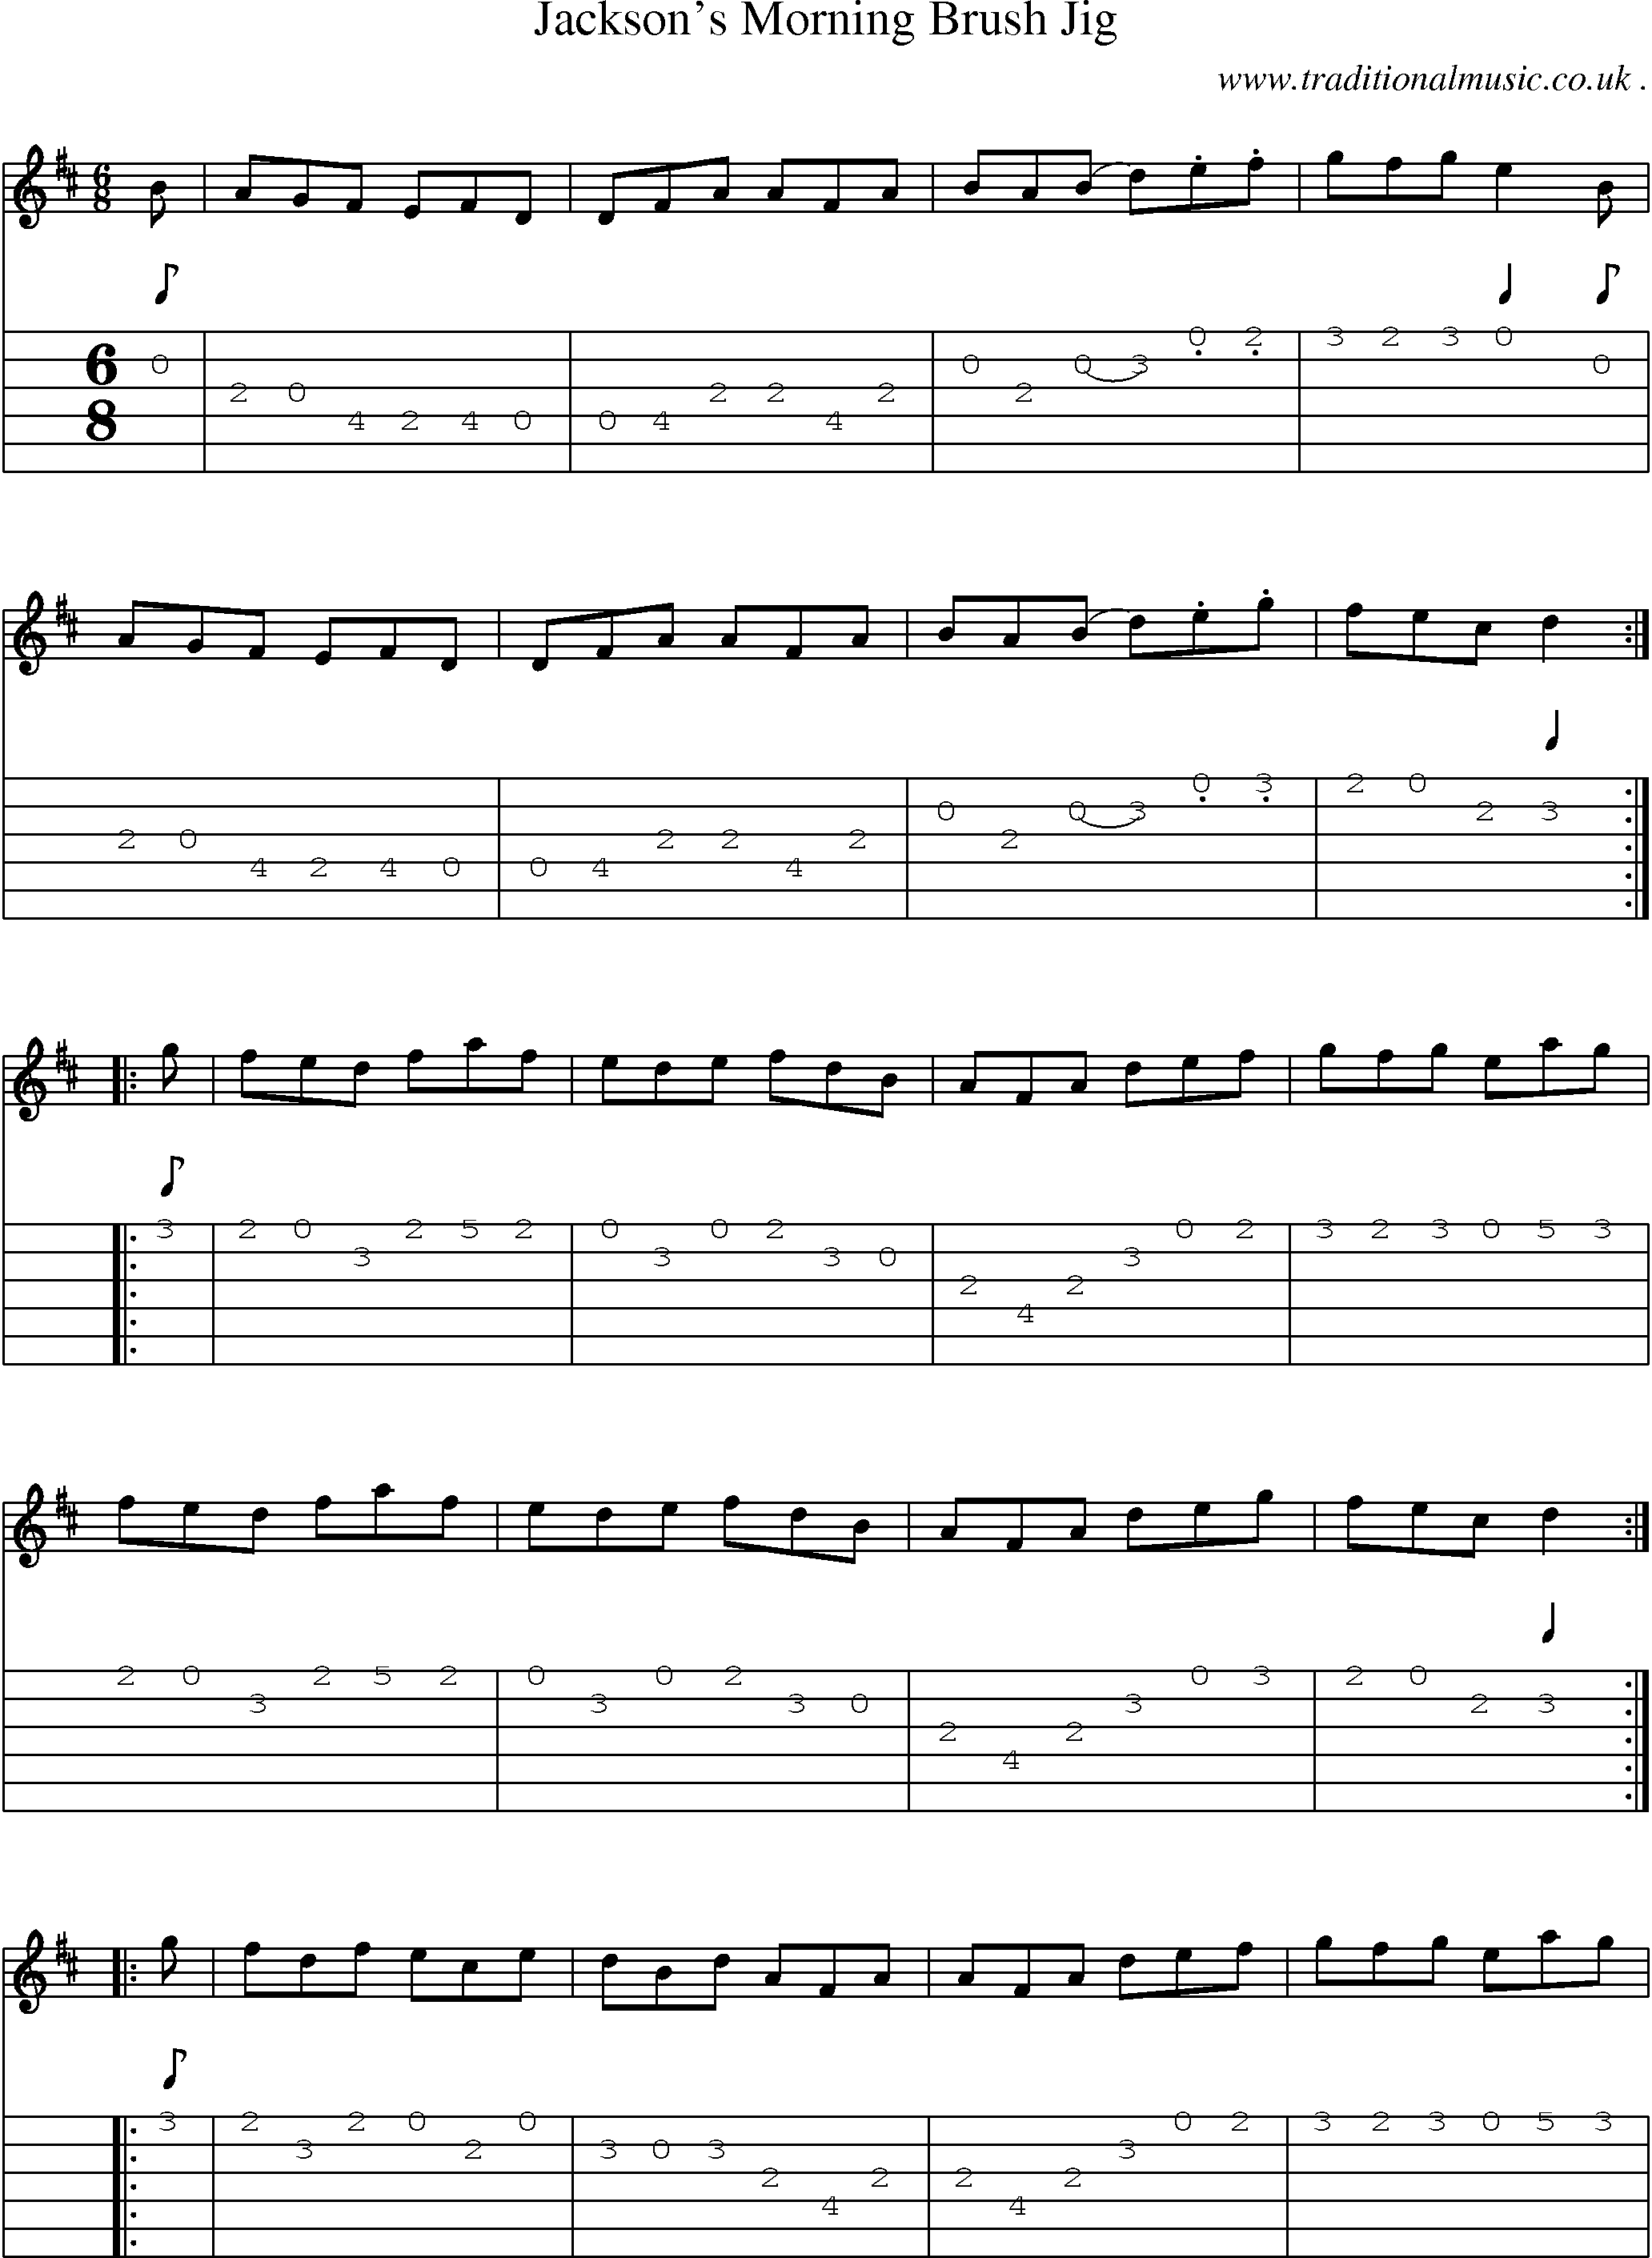 Sheet-Music and Guitar Tabs for Jacksons Morning Brush Jig